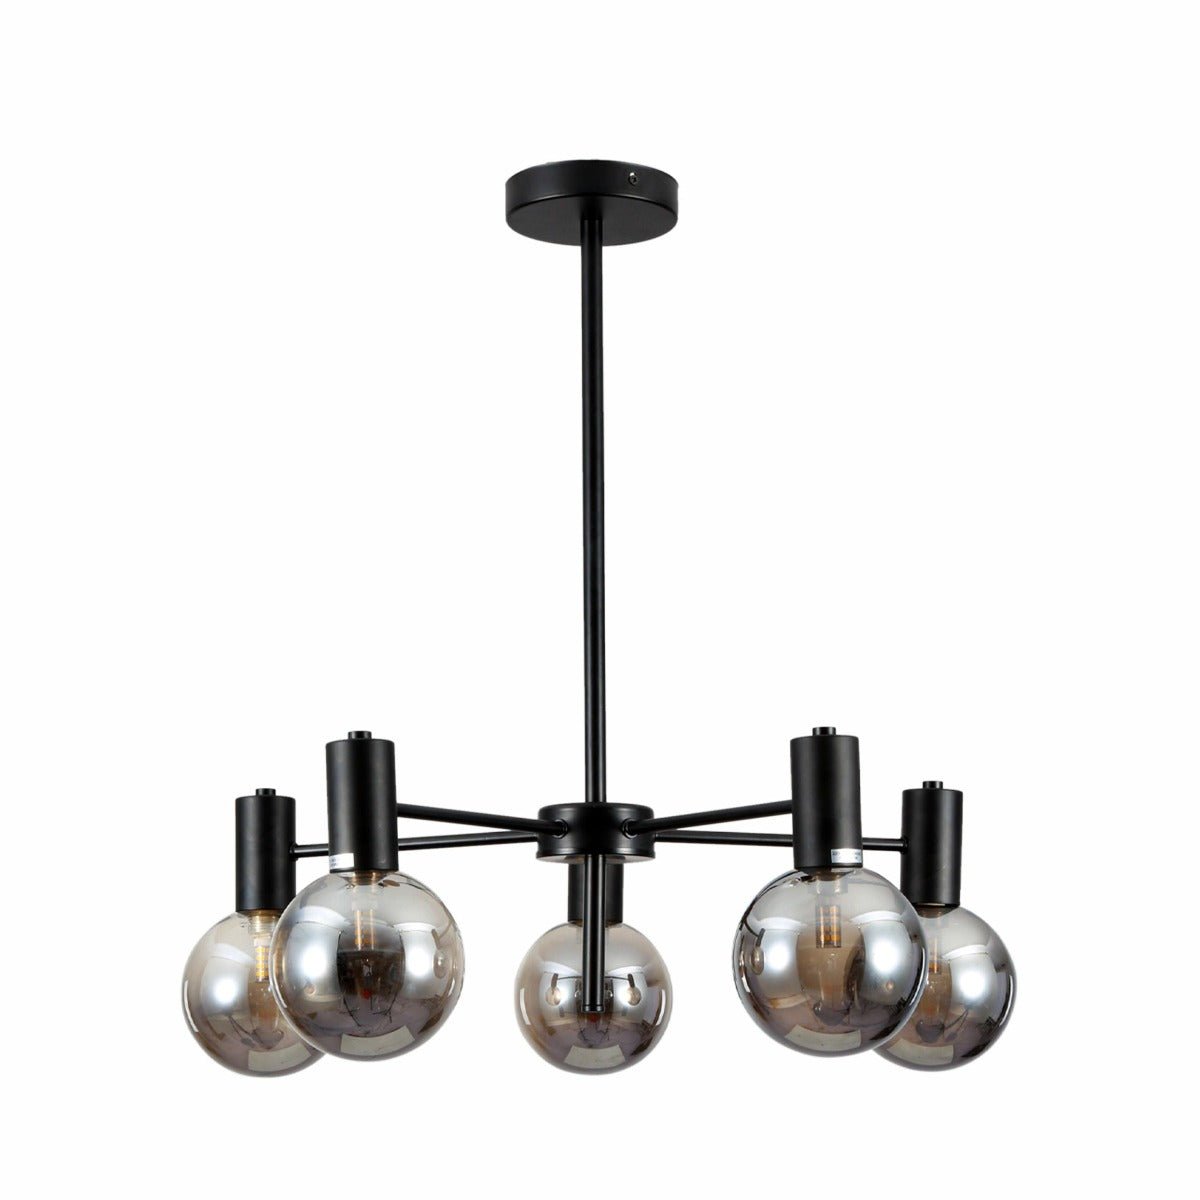 Main image of Black and Smoky Chandelier with 5xG9 Fitting | TEKLED 158-19618